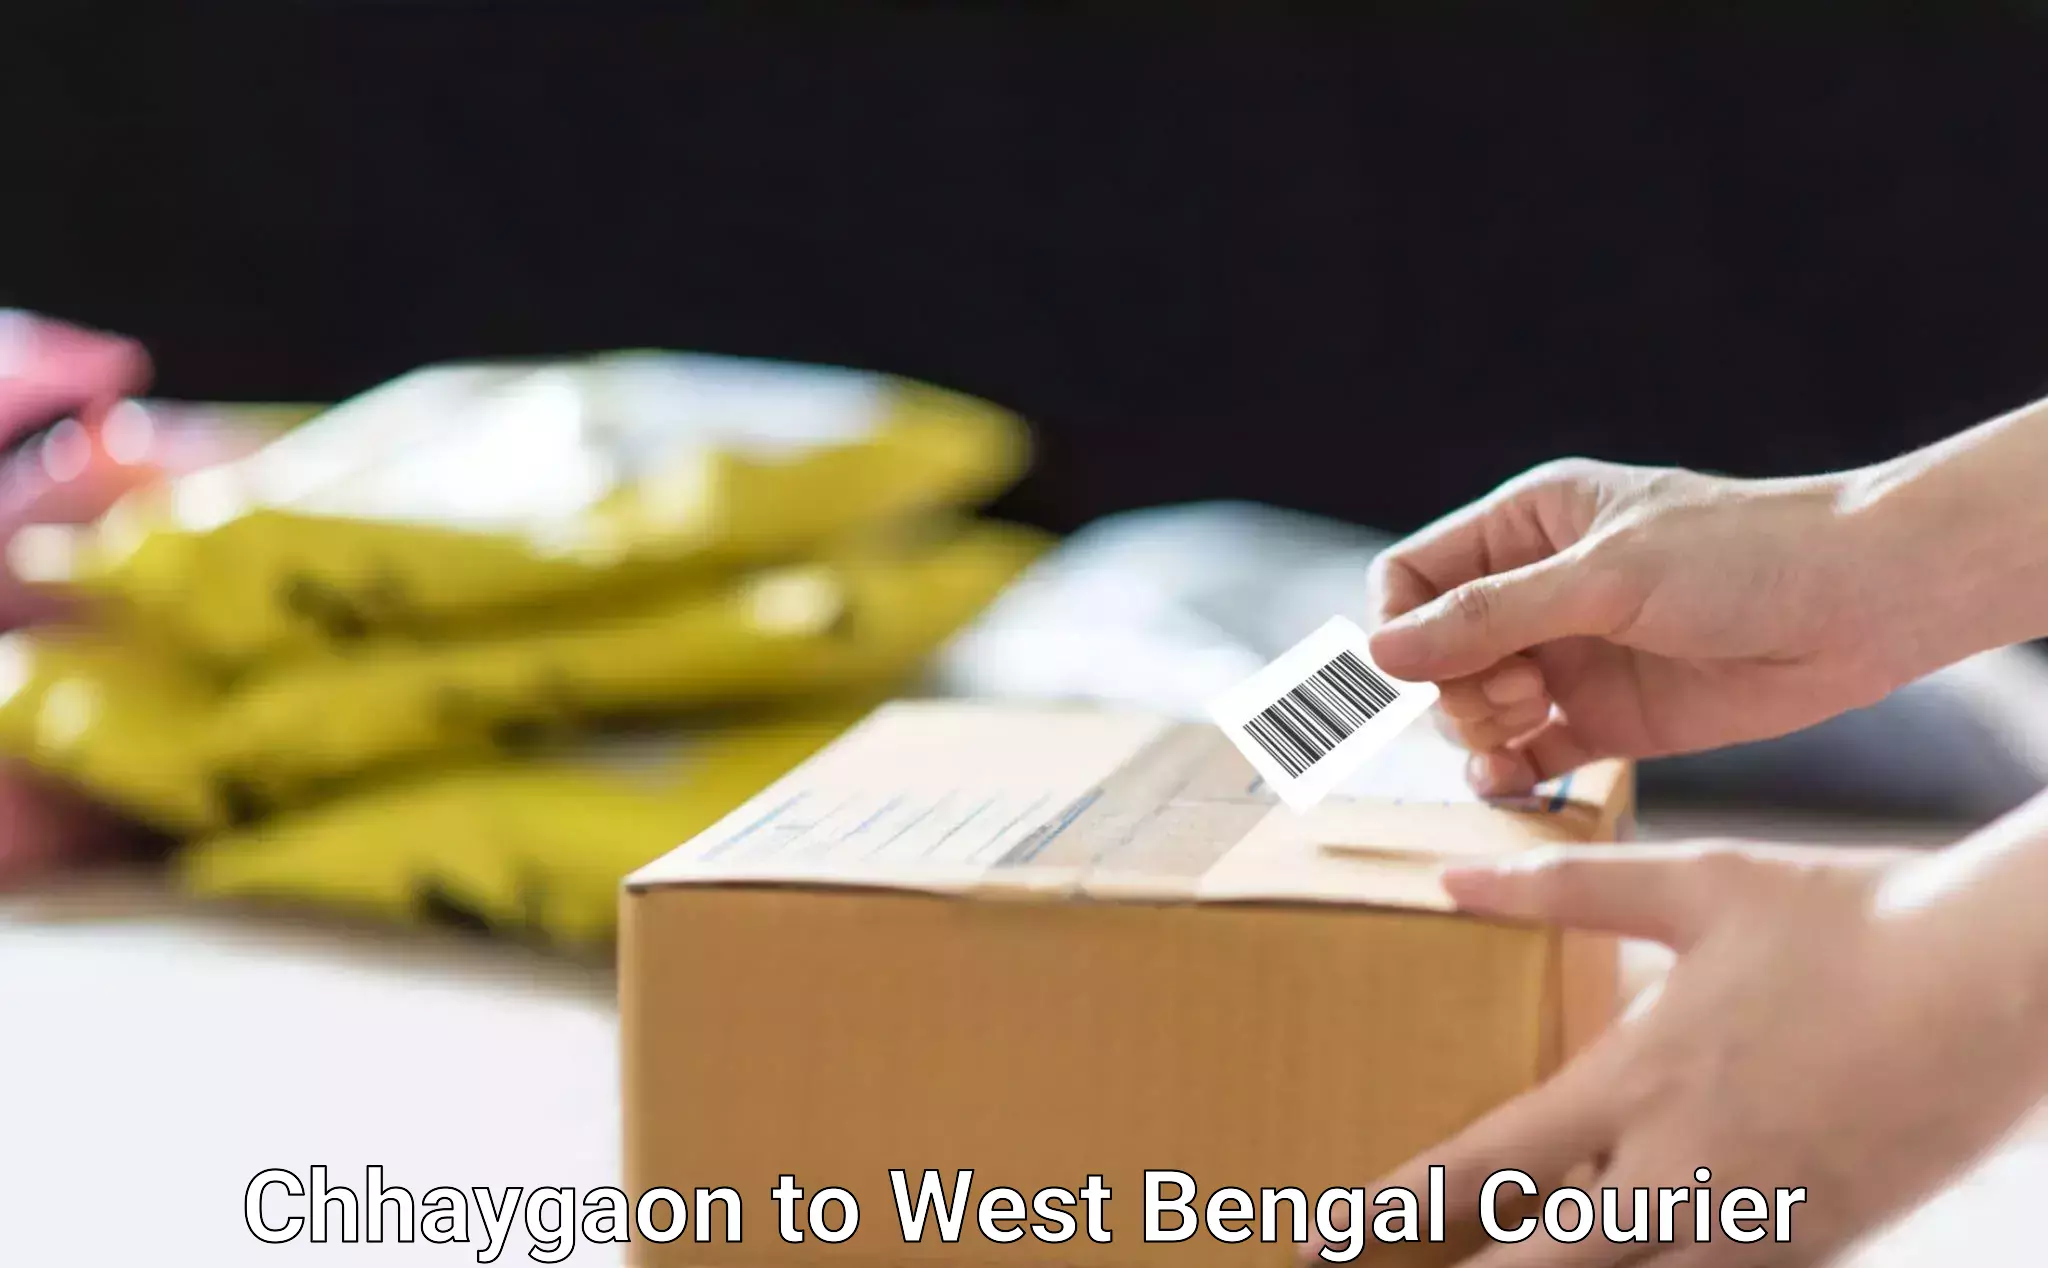 High-quality delivery services in Chhaygaon to Kolkata